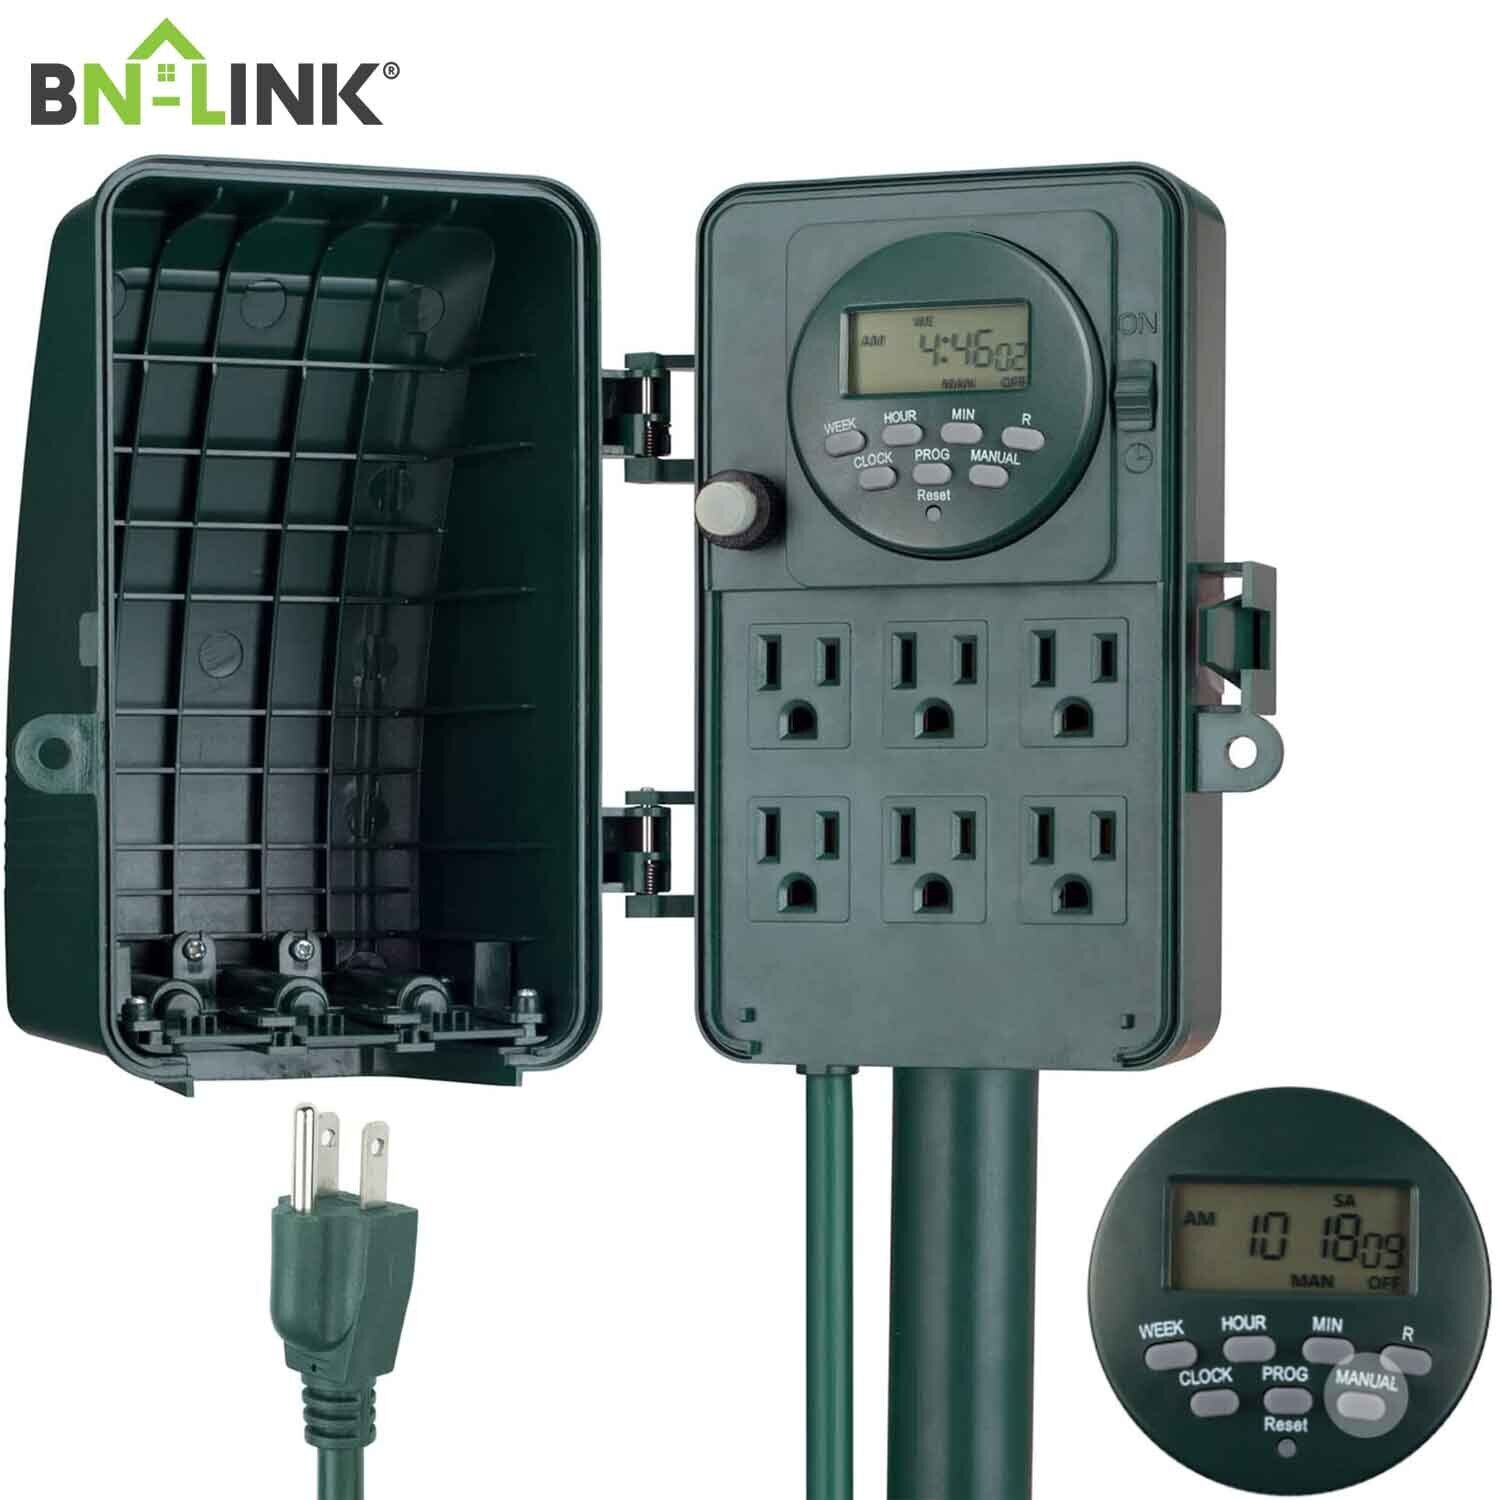 BN-LINK 7 Day Heavy Duty Outdoor Digital Stake Timer, 6 Outlets, Weatherproof